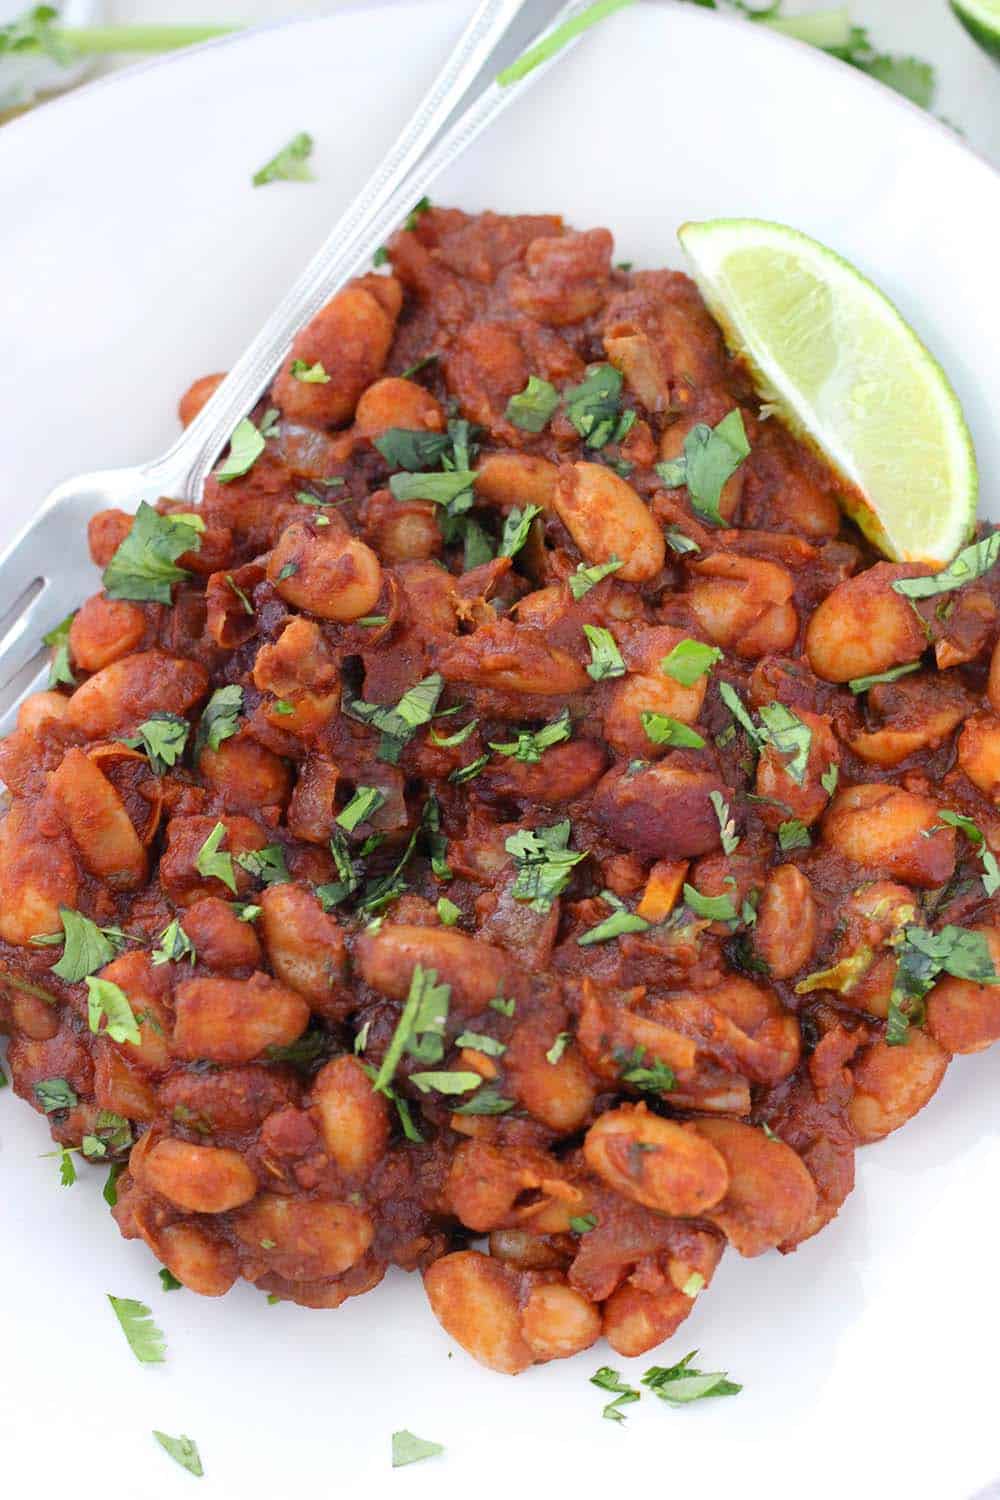 These Mexican Baked Beans with Chorizo are smoky, sweet, and spicy! This gluten free recipe makes a TON, and it's freezable. Serve as a side at your next BBQ, piled on toast, or with fried eggs for brunch.